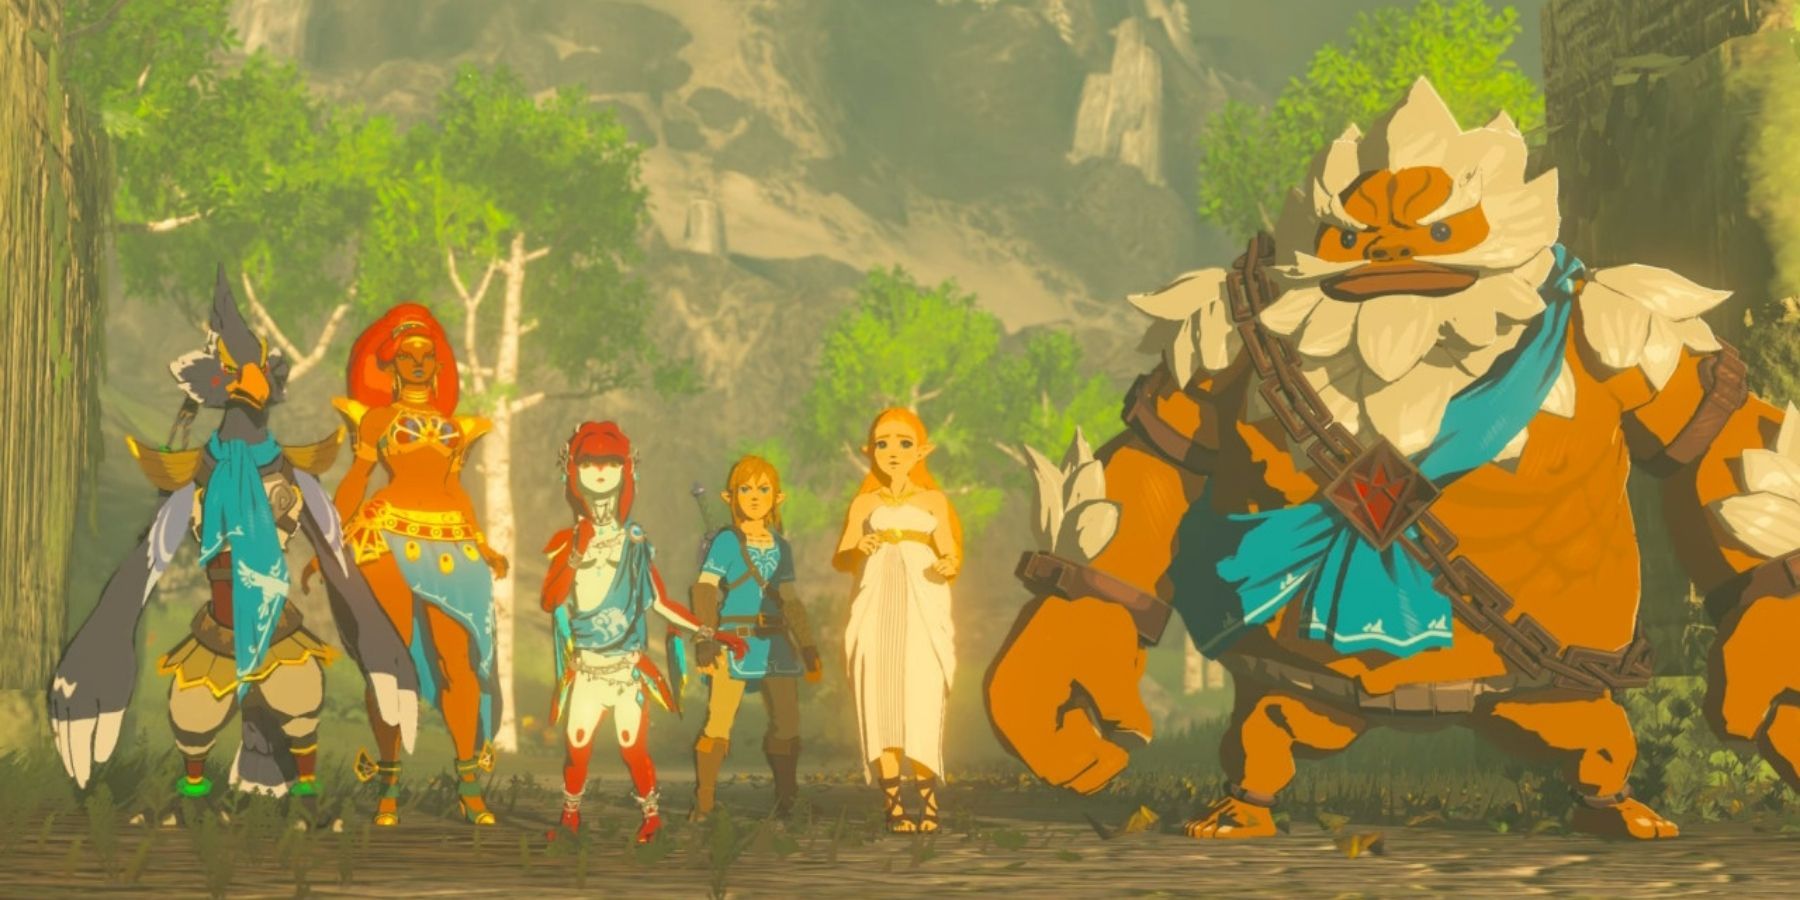 Princes Zelda and Breath of the Wild's five Champions standing in a wooded, mountainous area side-by-side; from left to right: Revali, Urbosa, Mipha, Link, Zelda, and Daruk.